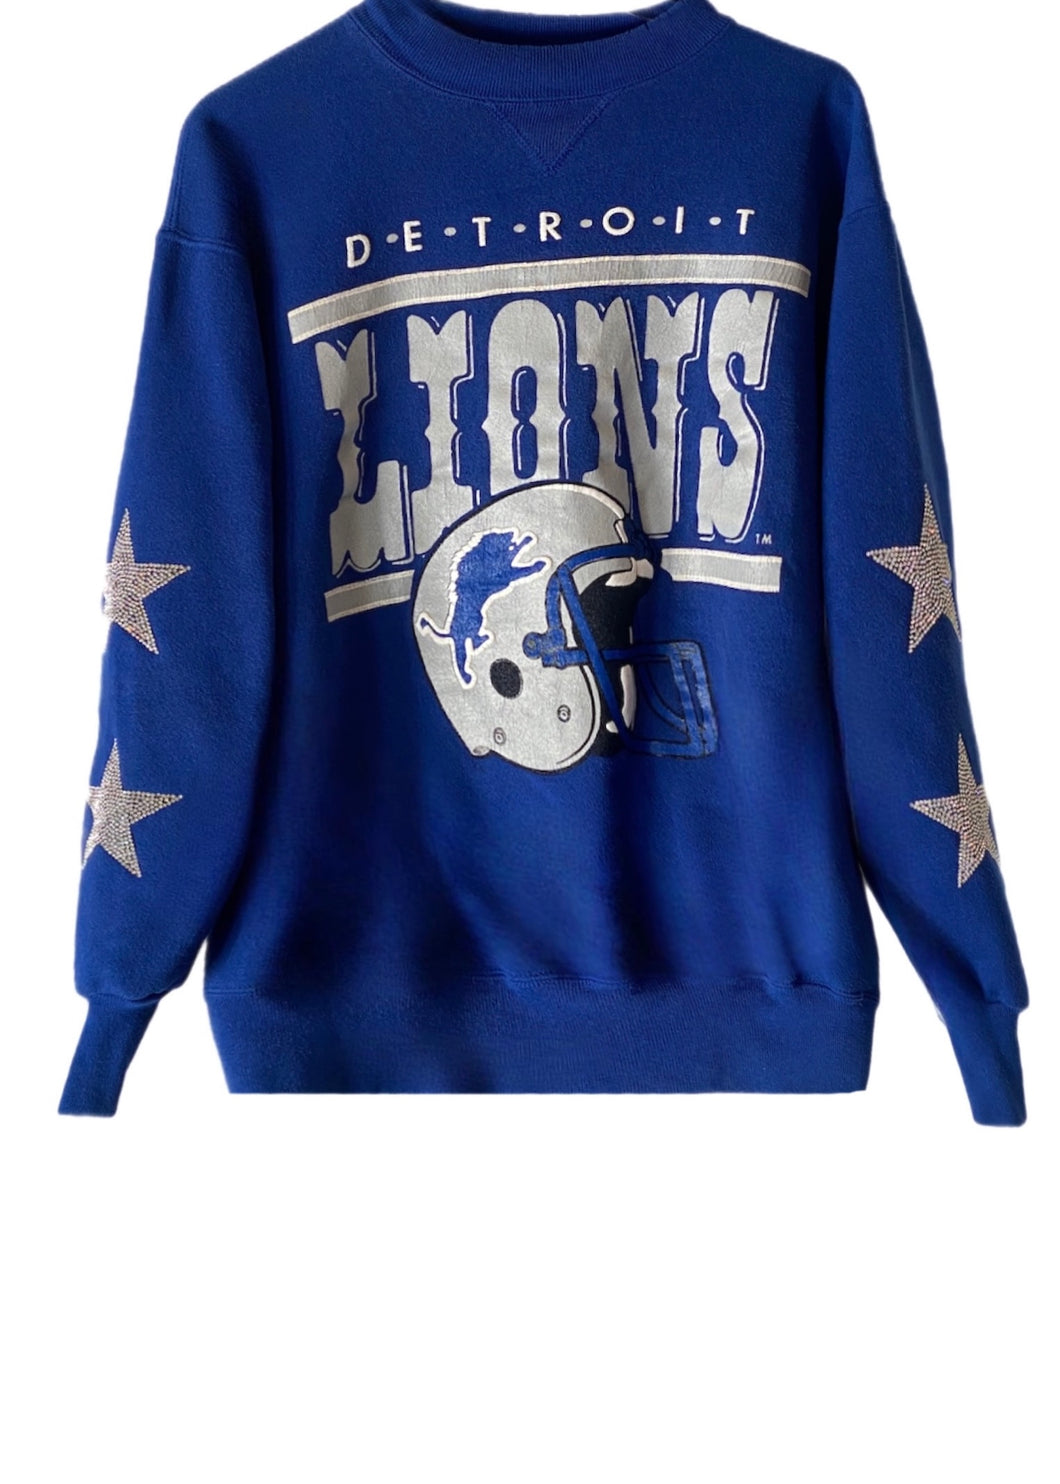 Detroit, Michigan Lions, NFL “Early 90’s” One of a KIND Vintage Sweatshirt with Crystal Star Design